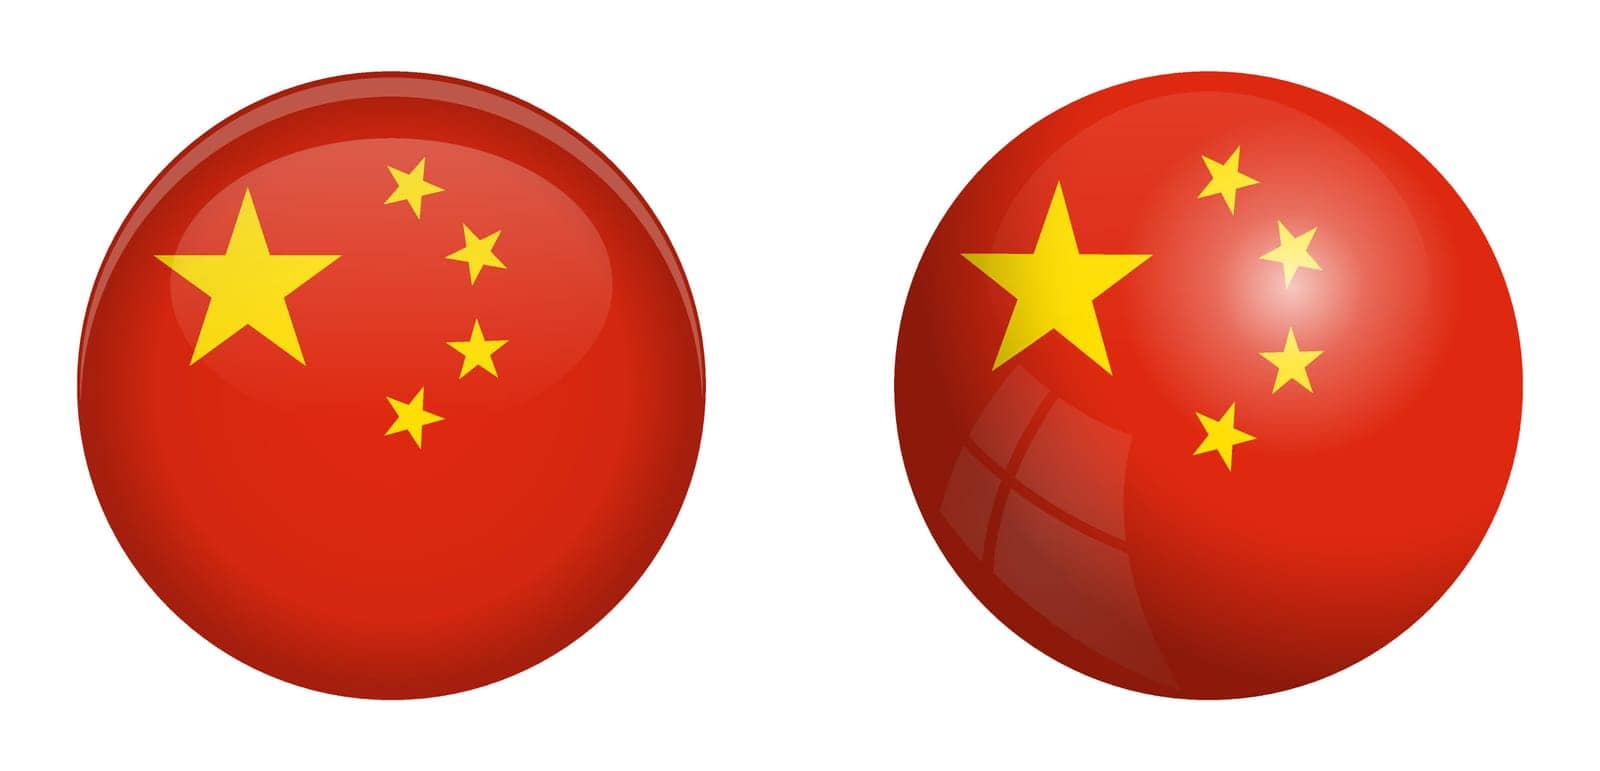 China flag under 3d dome button and on glossy sphere / ball.